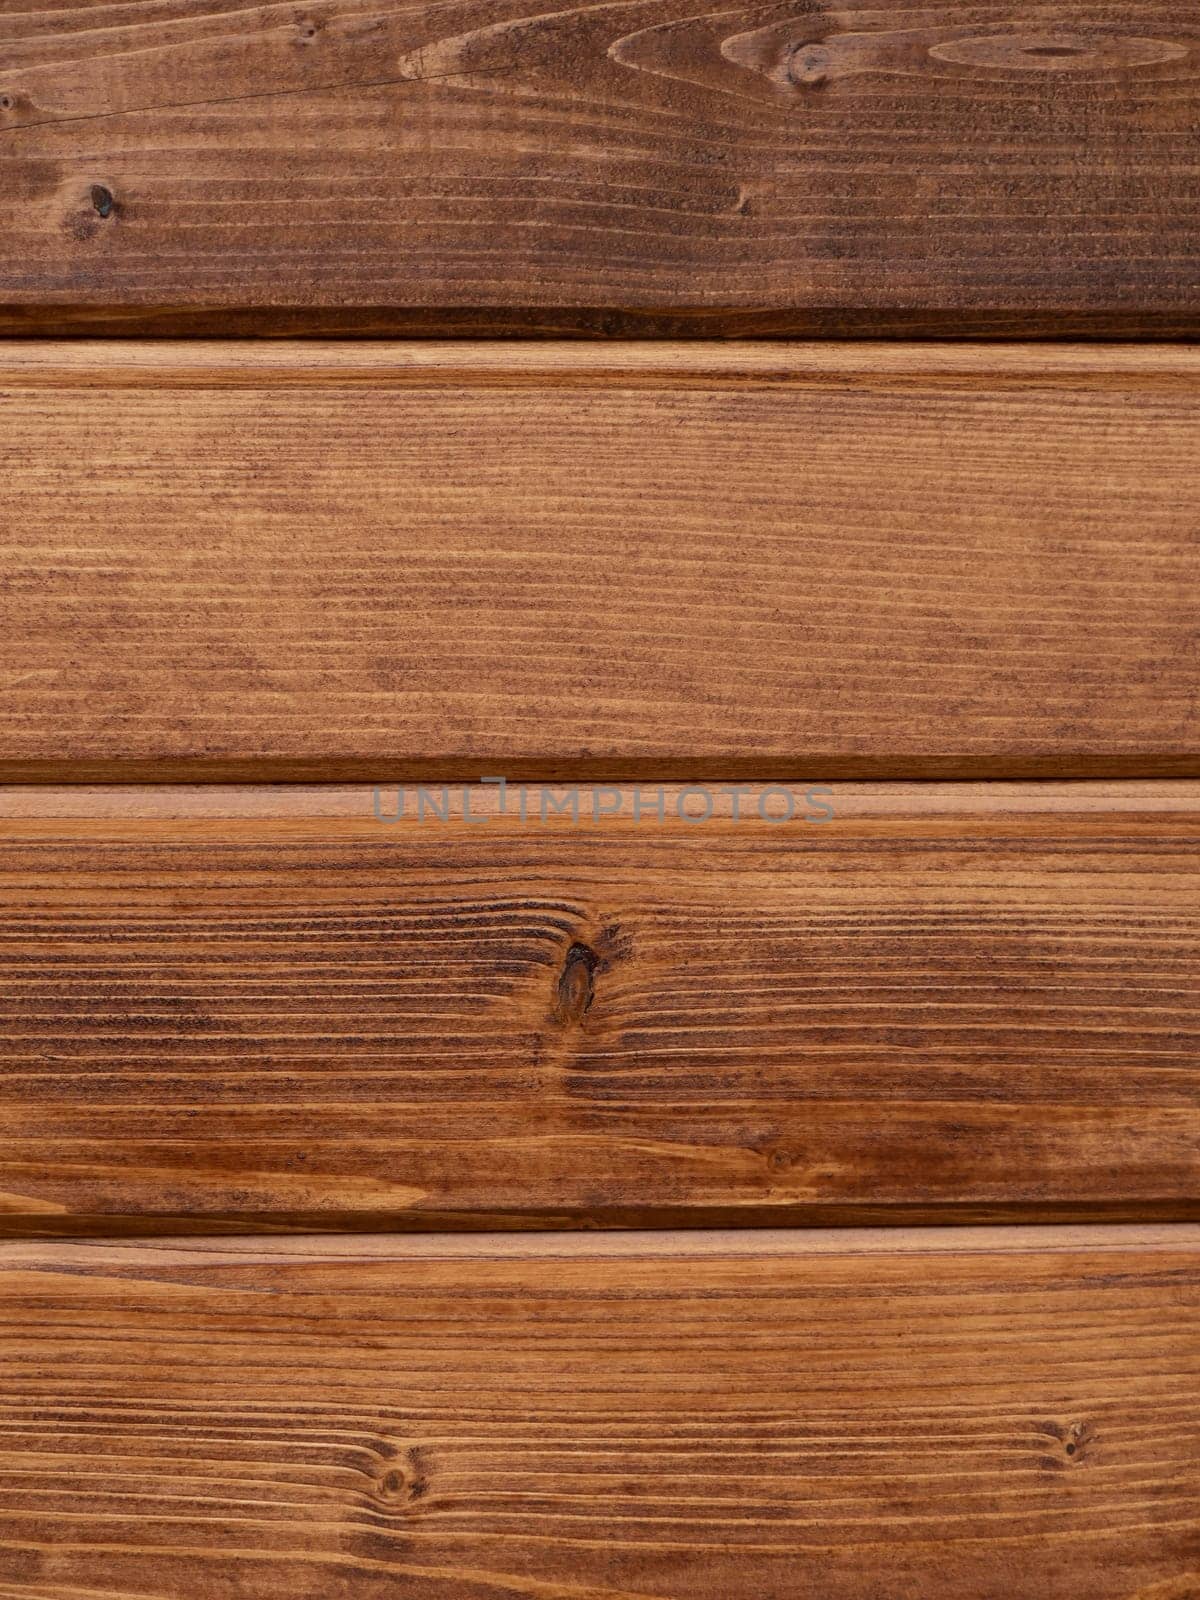 Hardwood light brown. Shabby wooden wall background. Texture of obsolete carpentry wooden boards, panel. Vintage orange wood floor. Wooden plank grunge texture. Vertical view